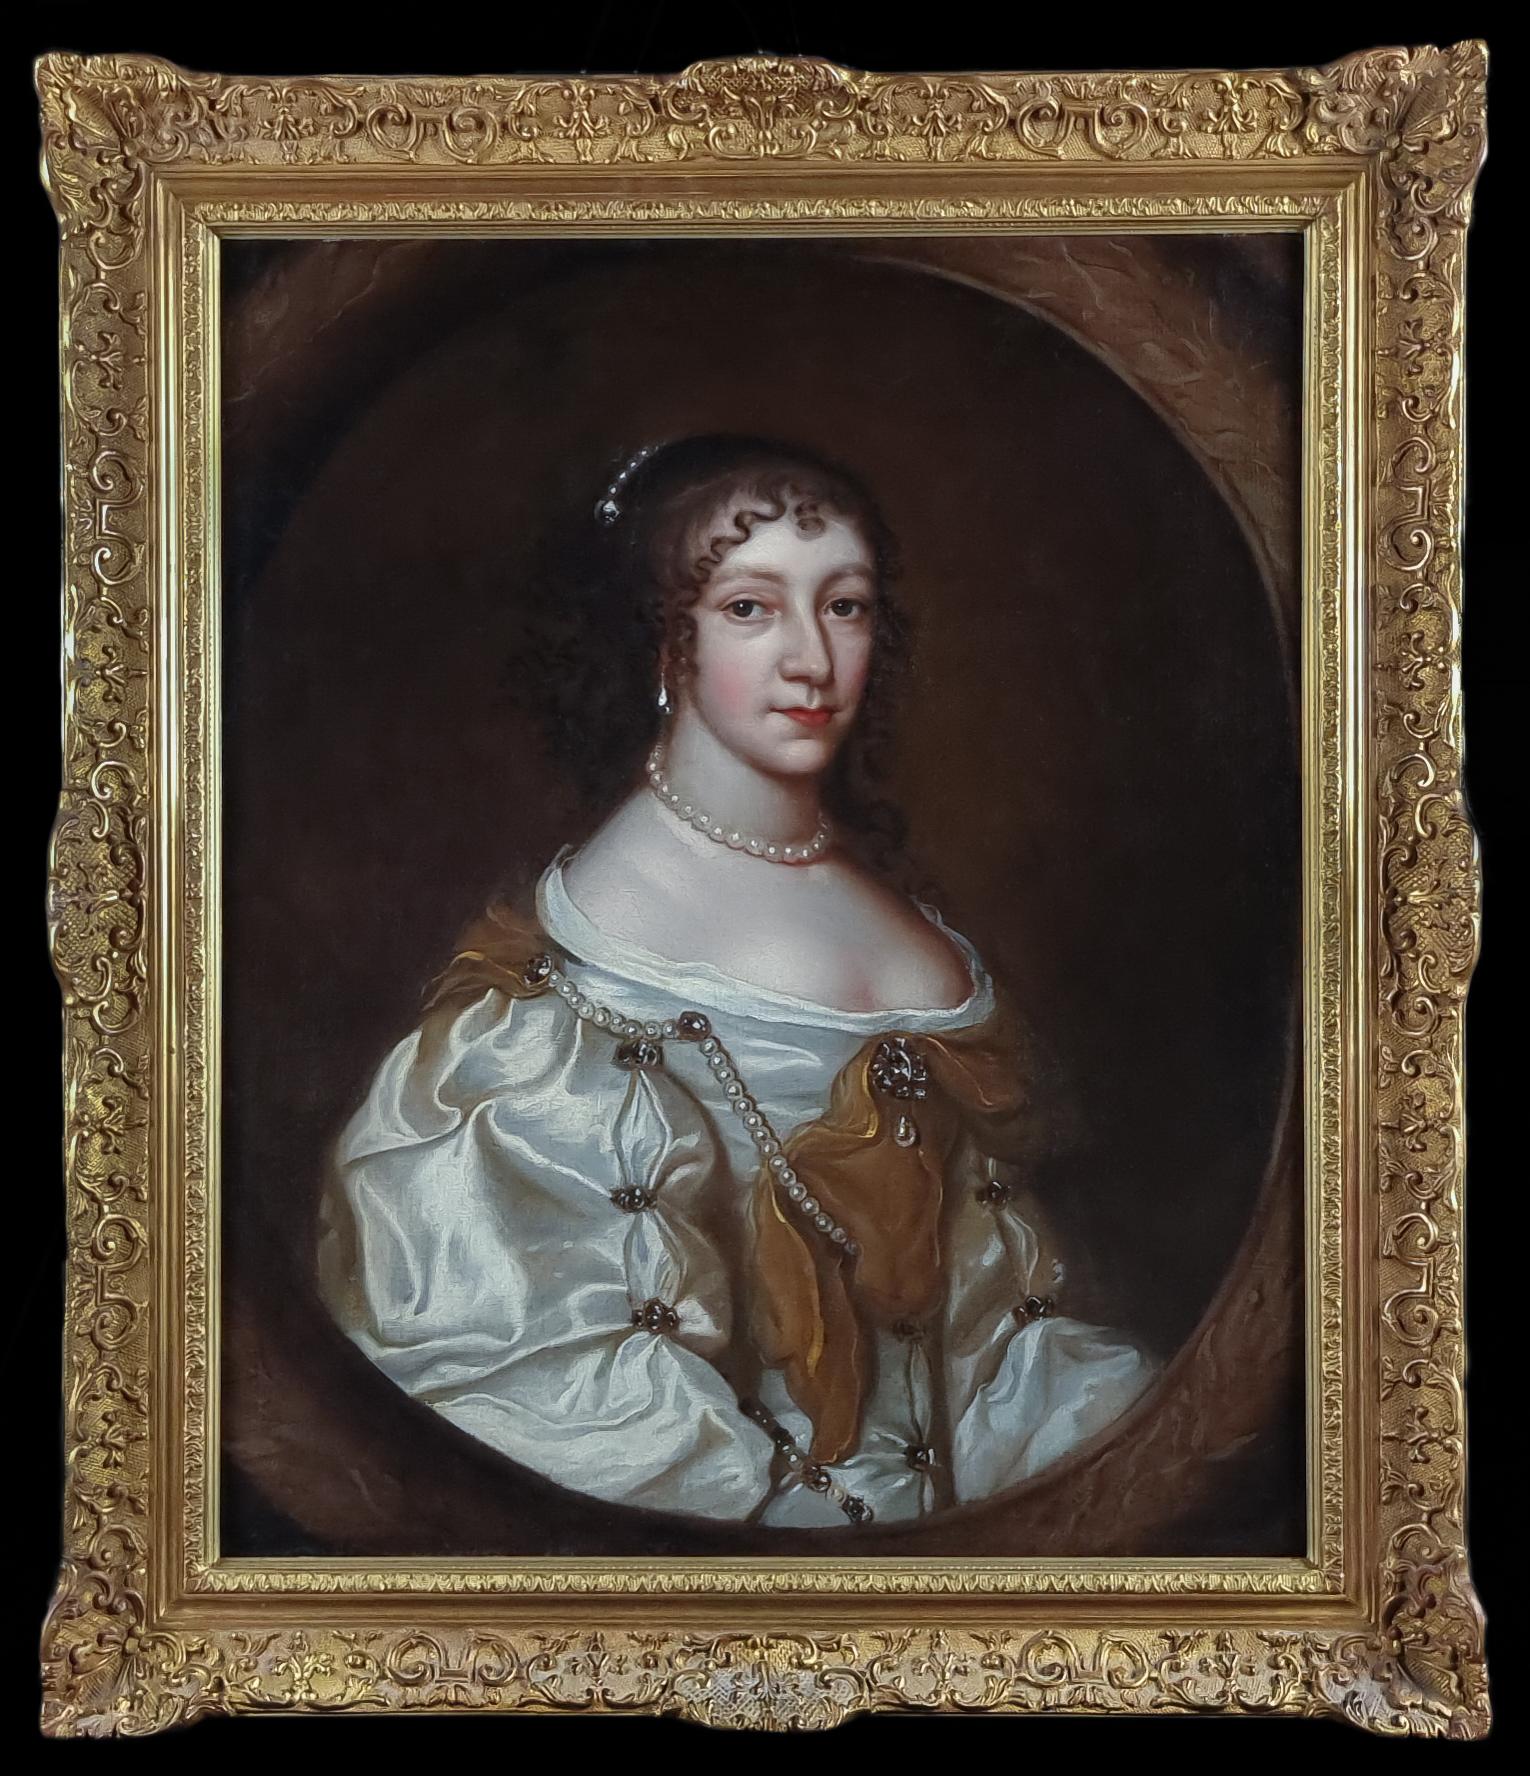 Portrait of a Lady in Silver Silk Dress & Pearls c.1660, Oil on canvas painting